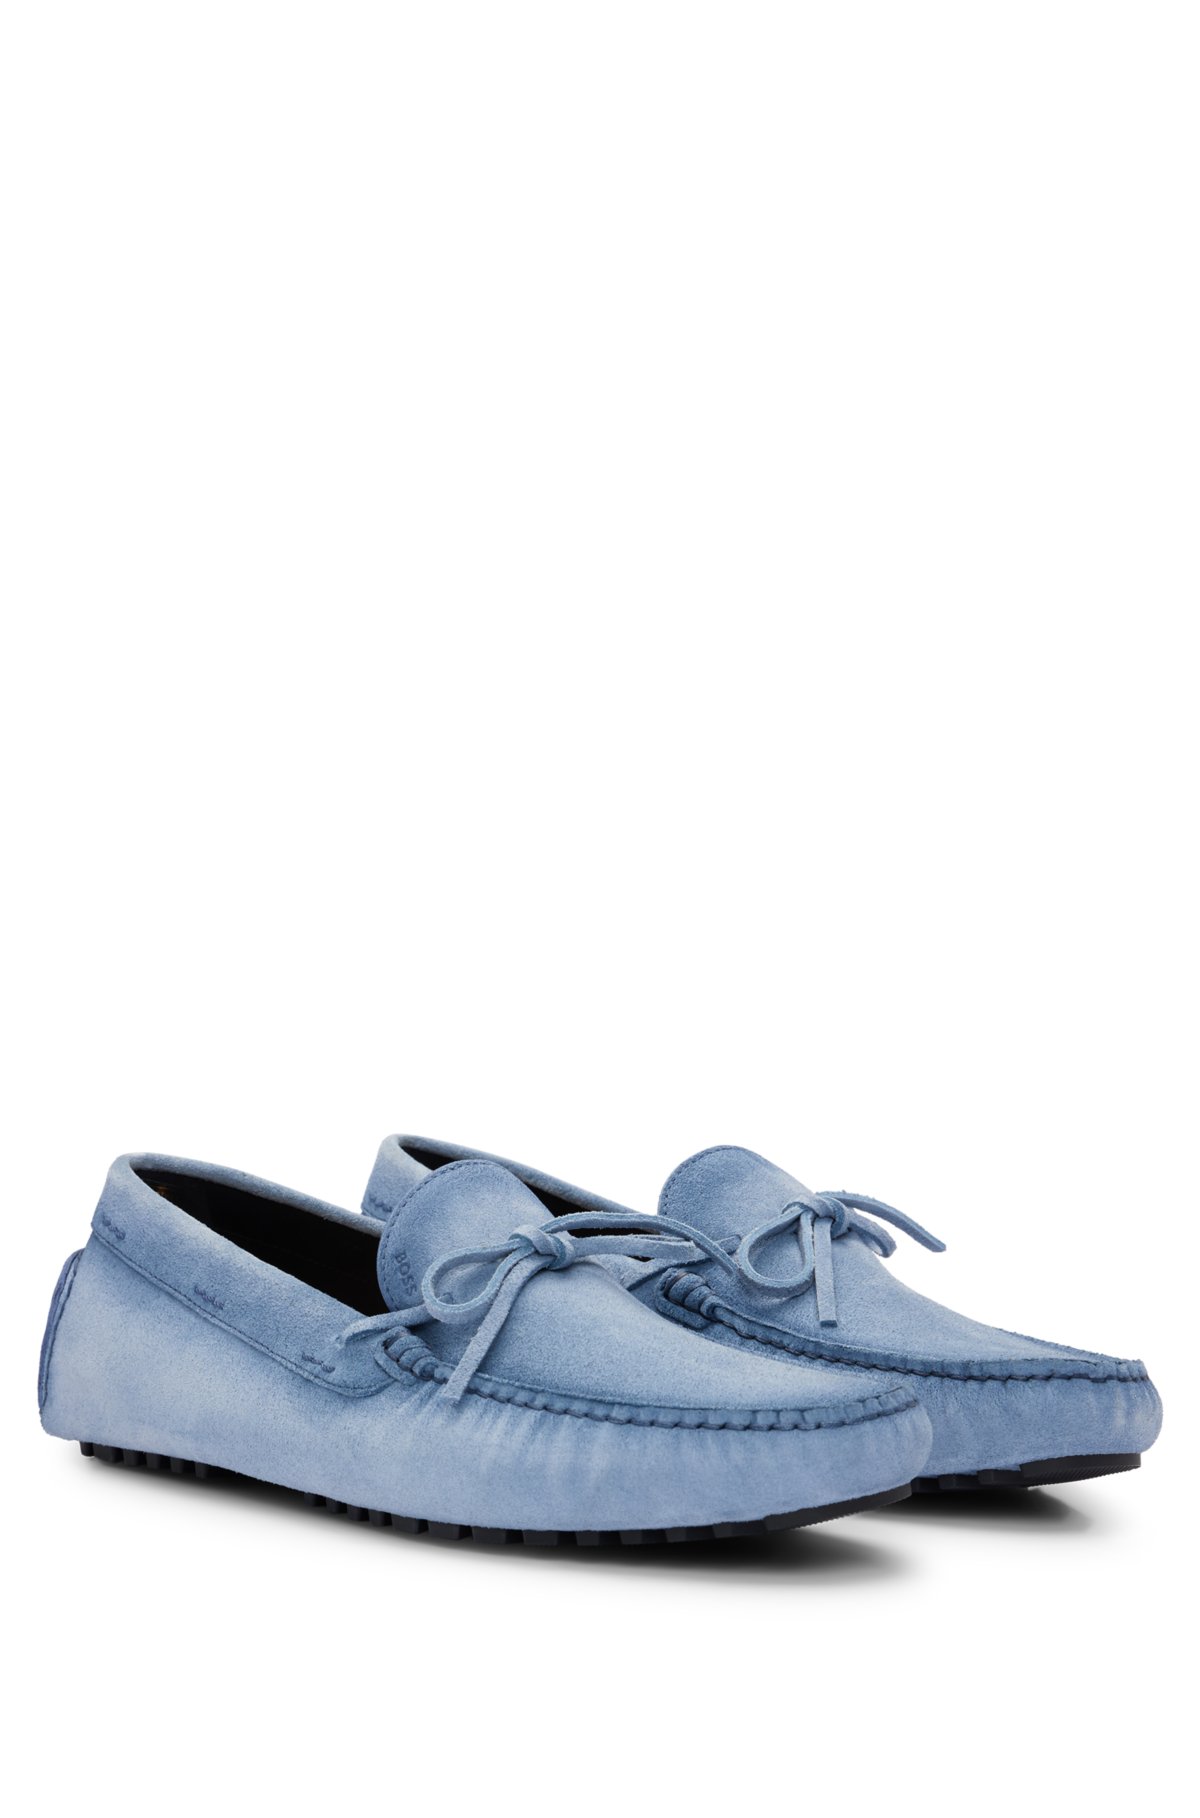 Suede moccasins with buckled upper strap